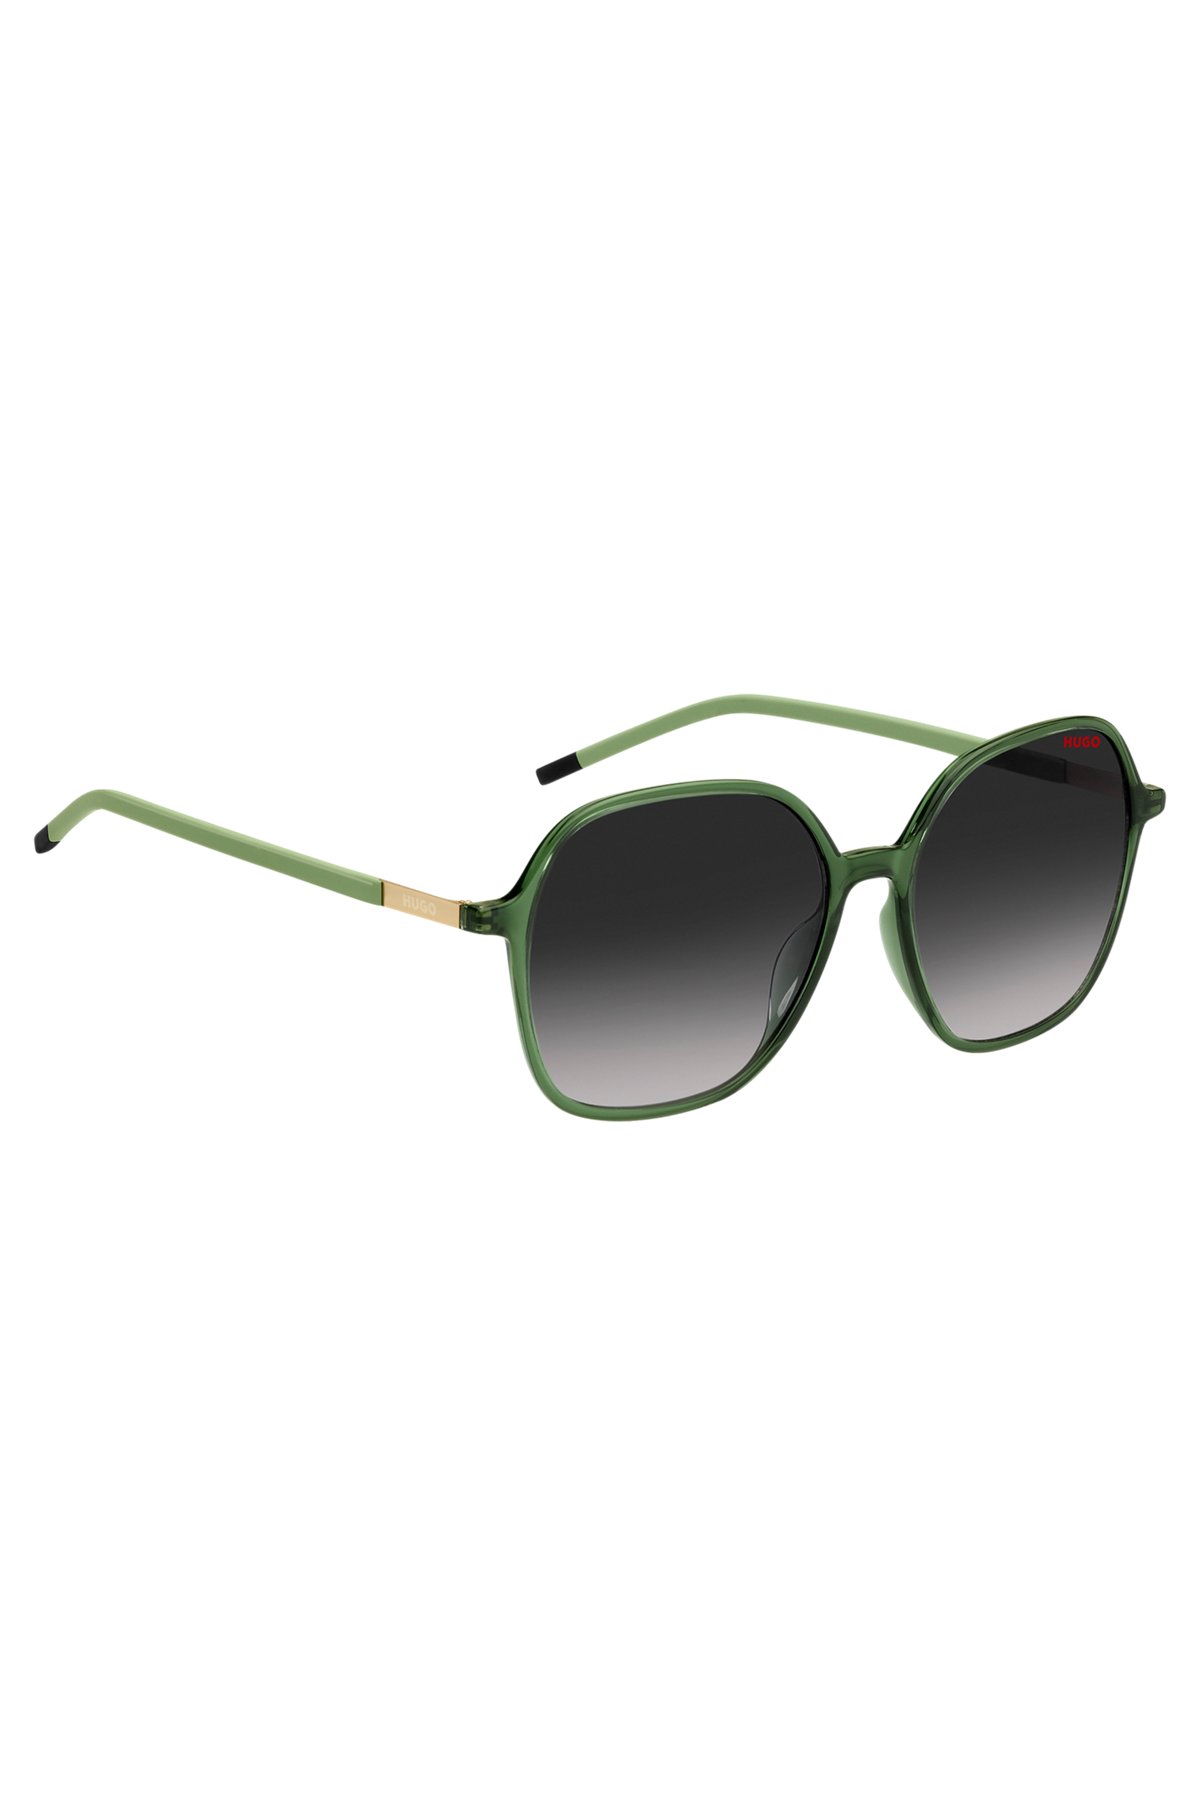 Green sunglasses with stainless-steel temples, Dark Green